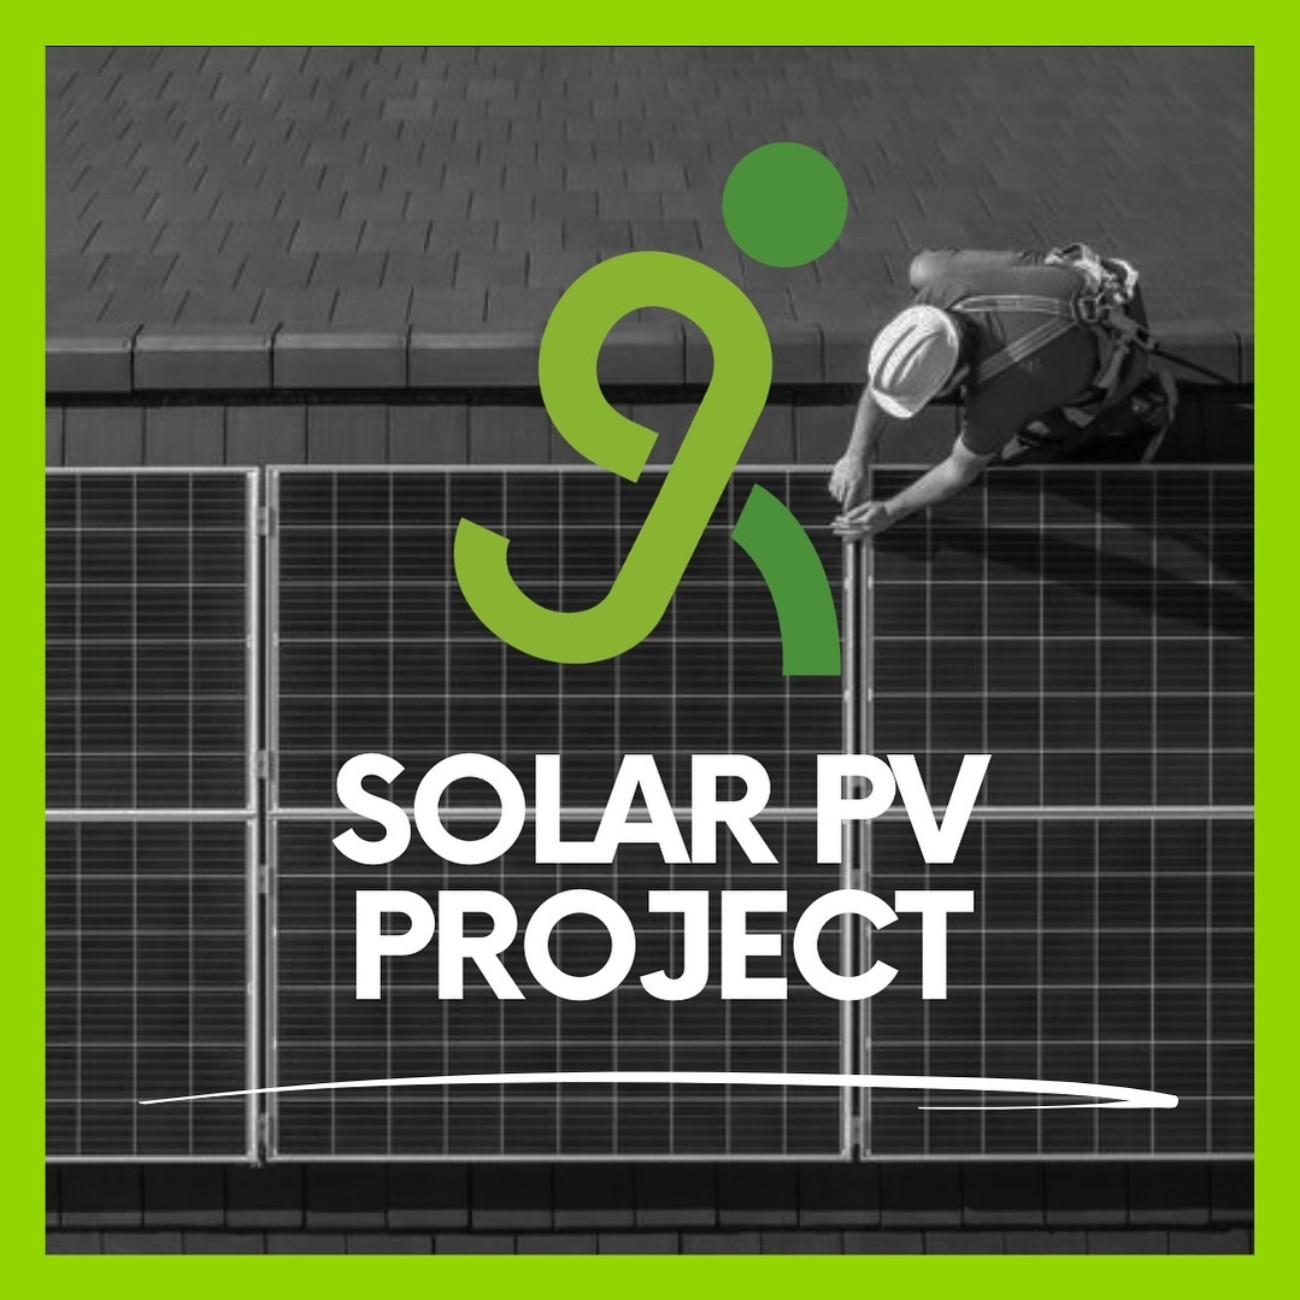 SOLAR PV PROJECT